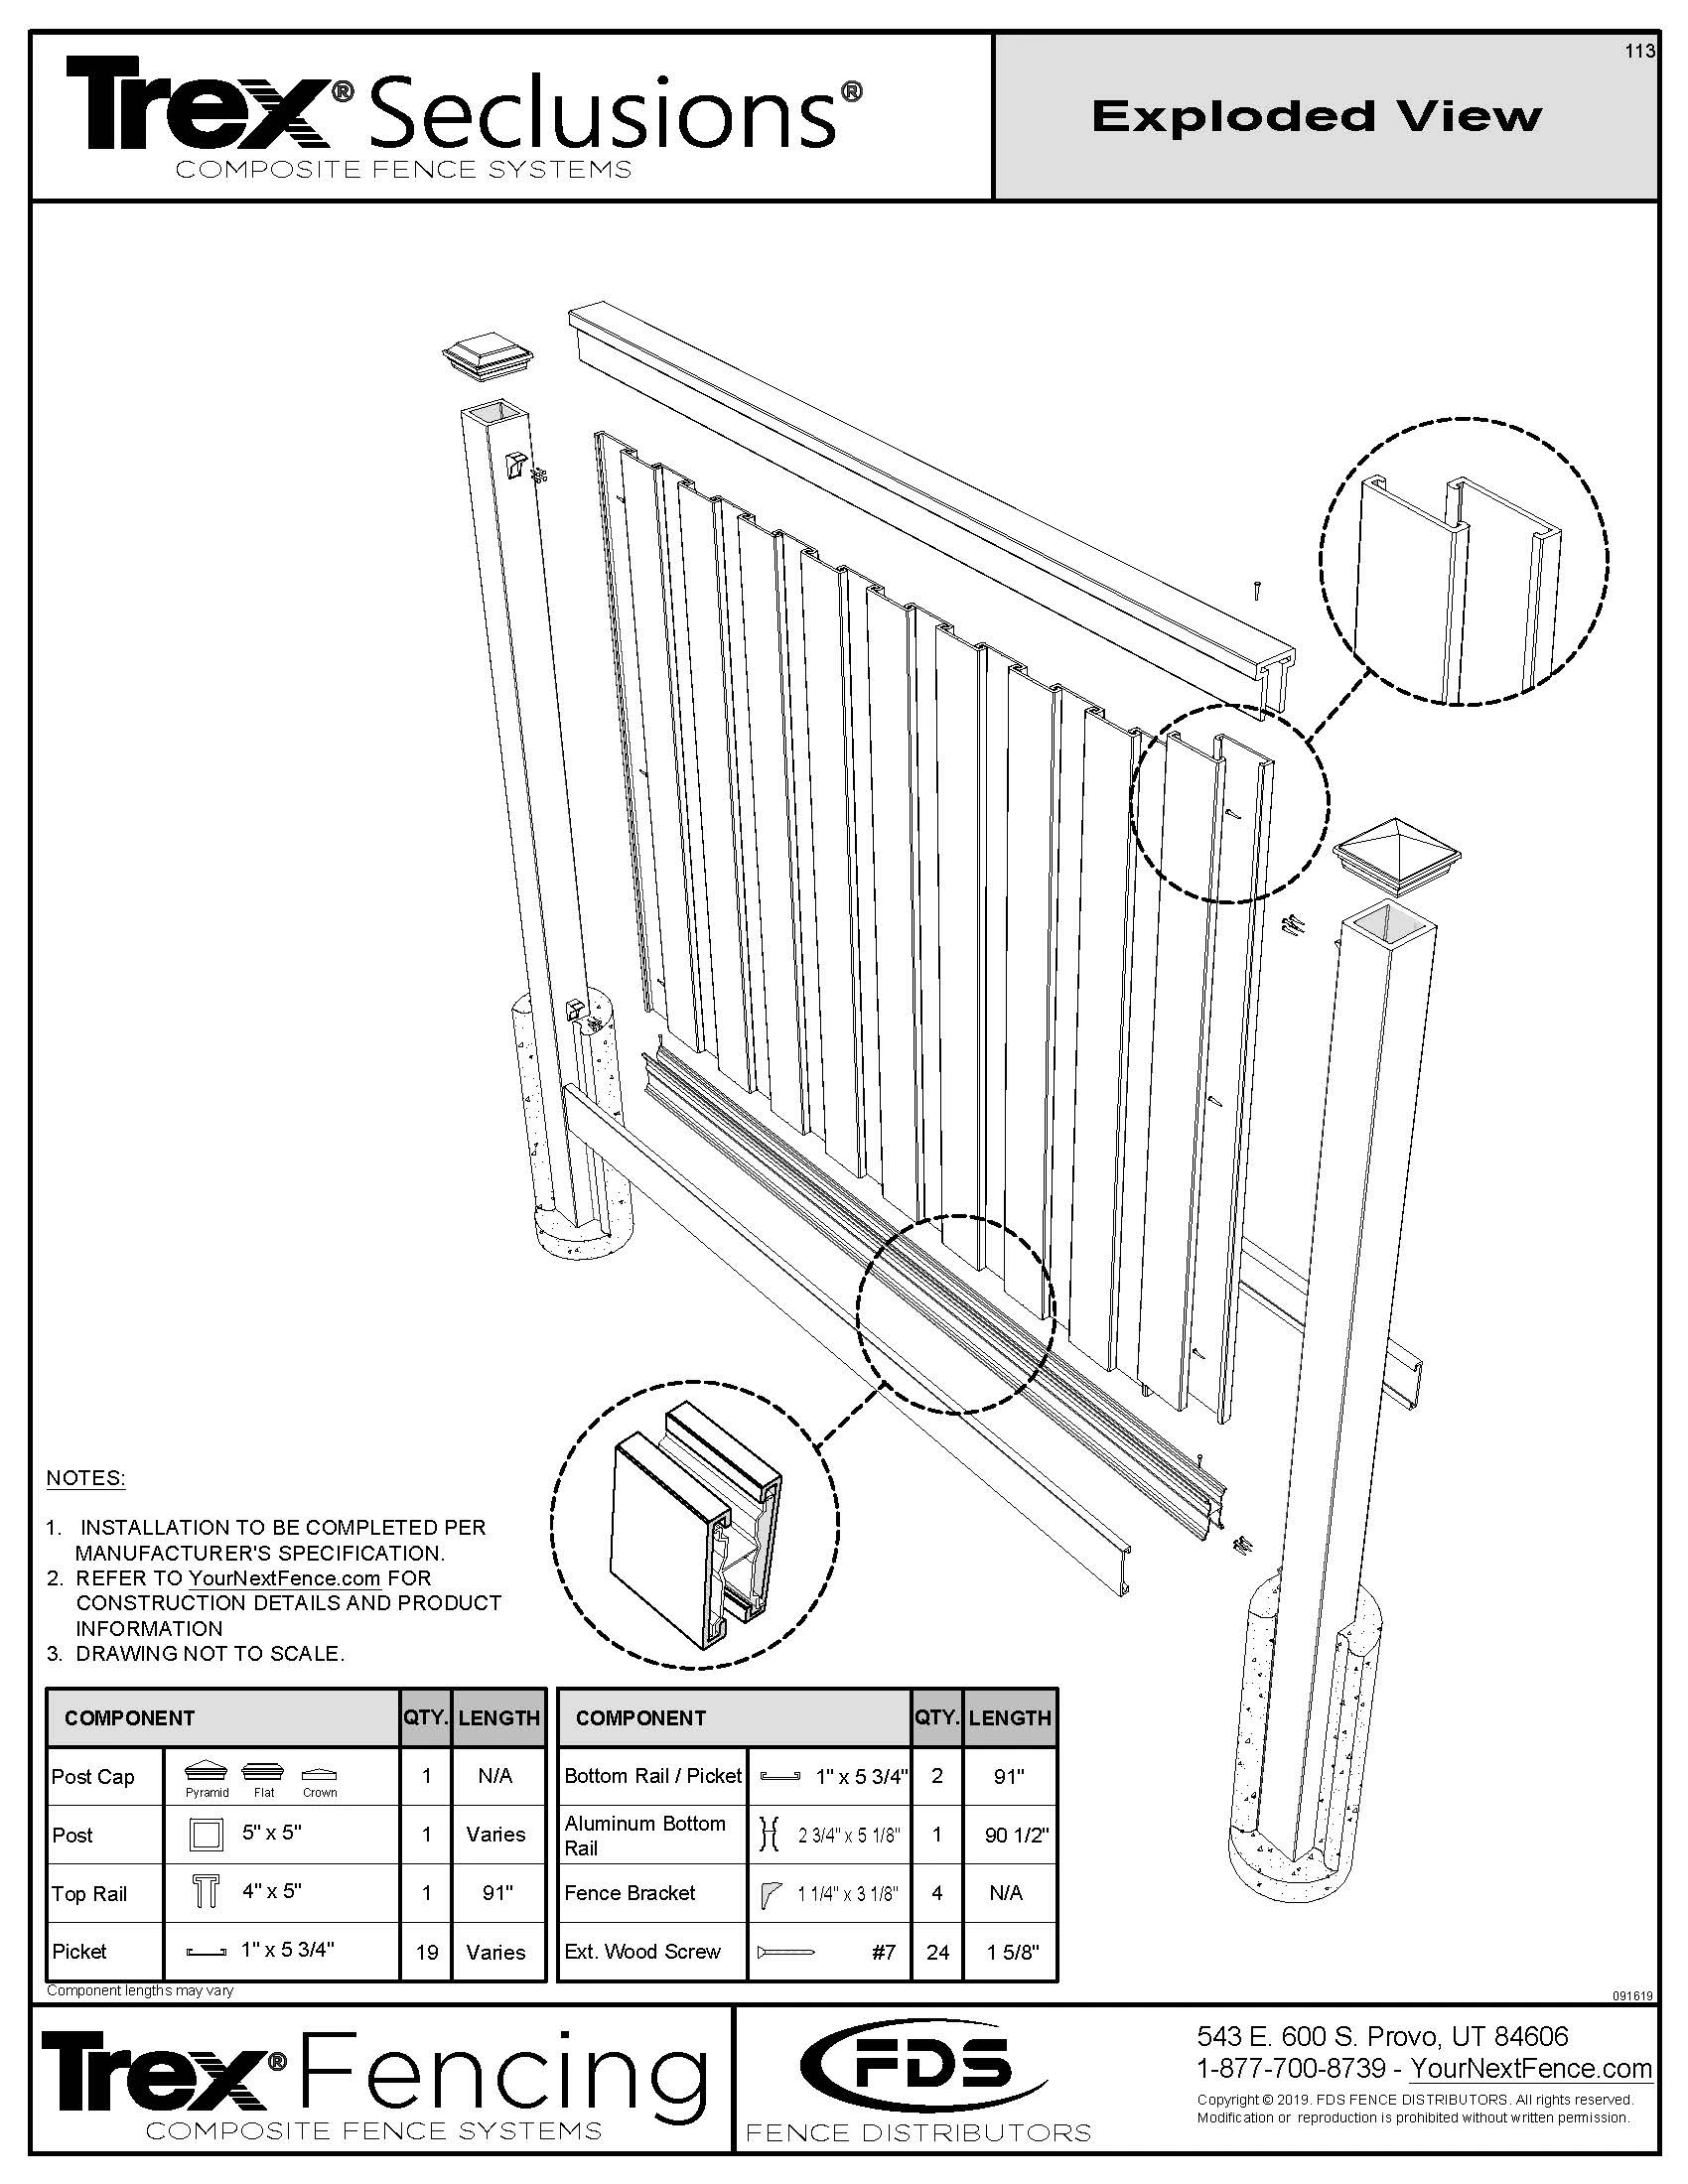 Exploded view of Trex Fence Panel Kit